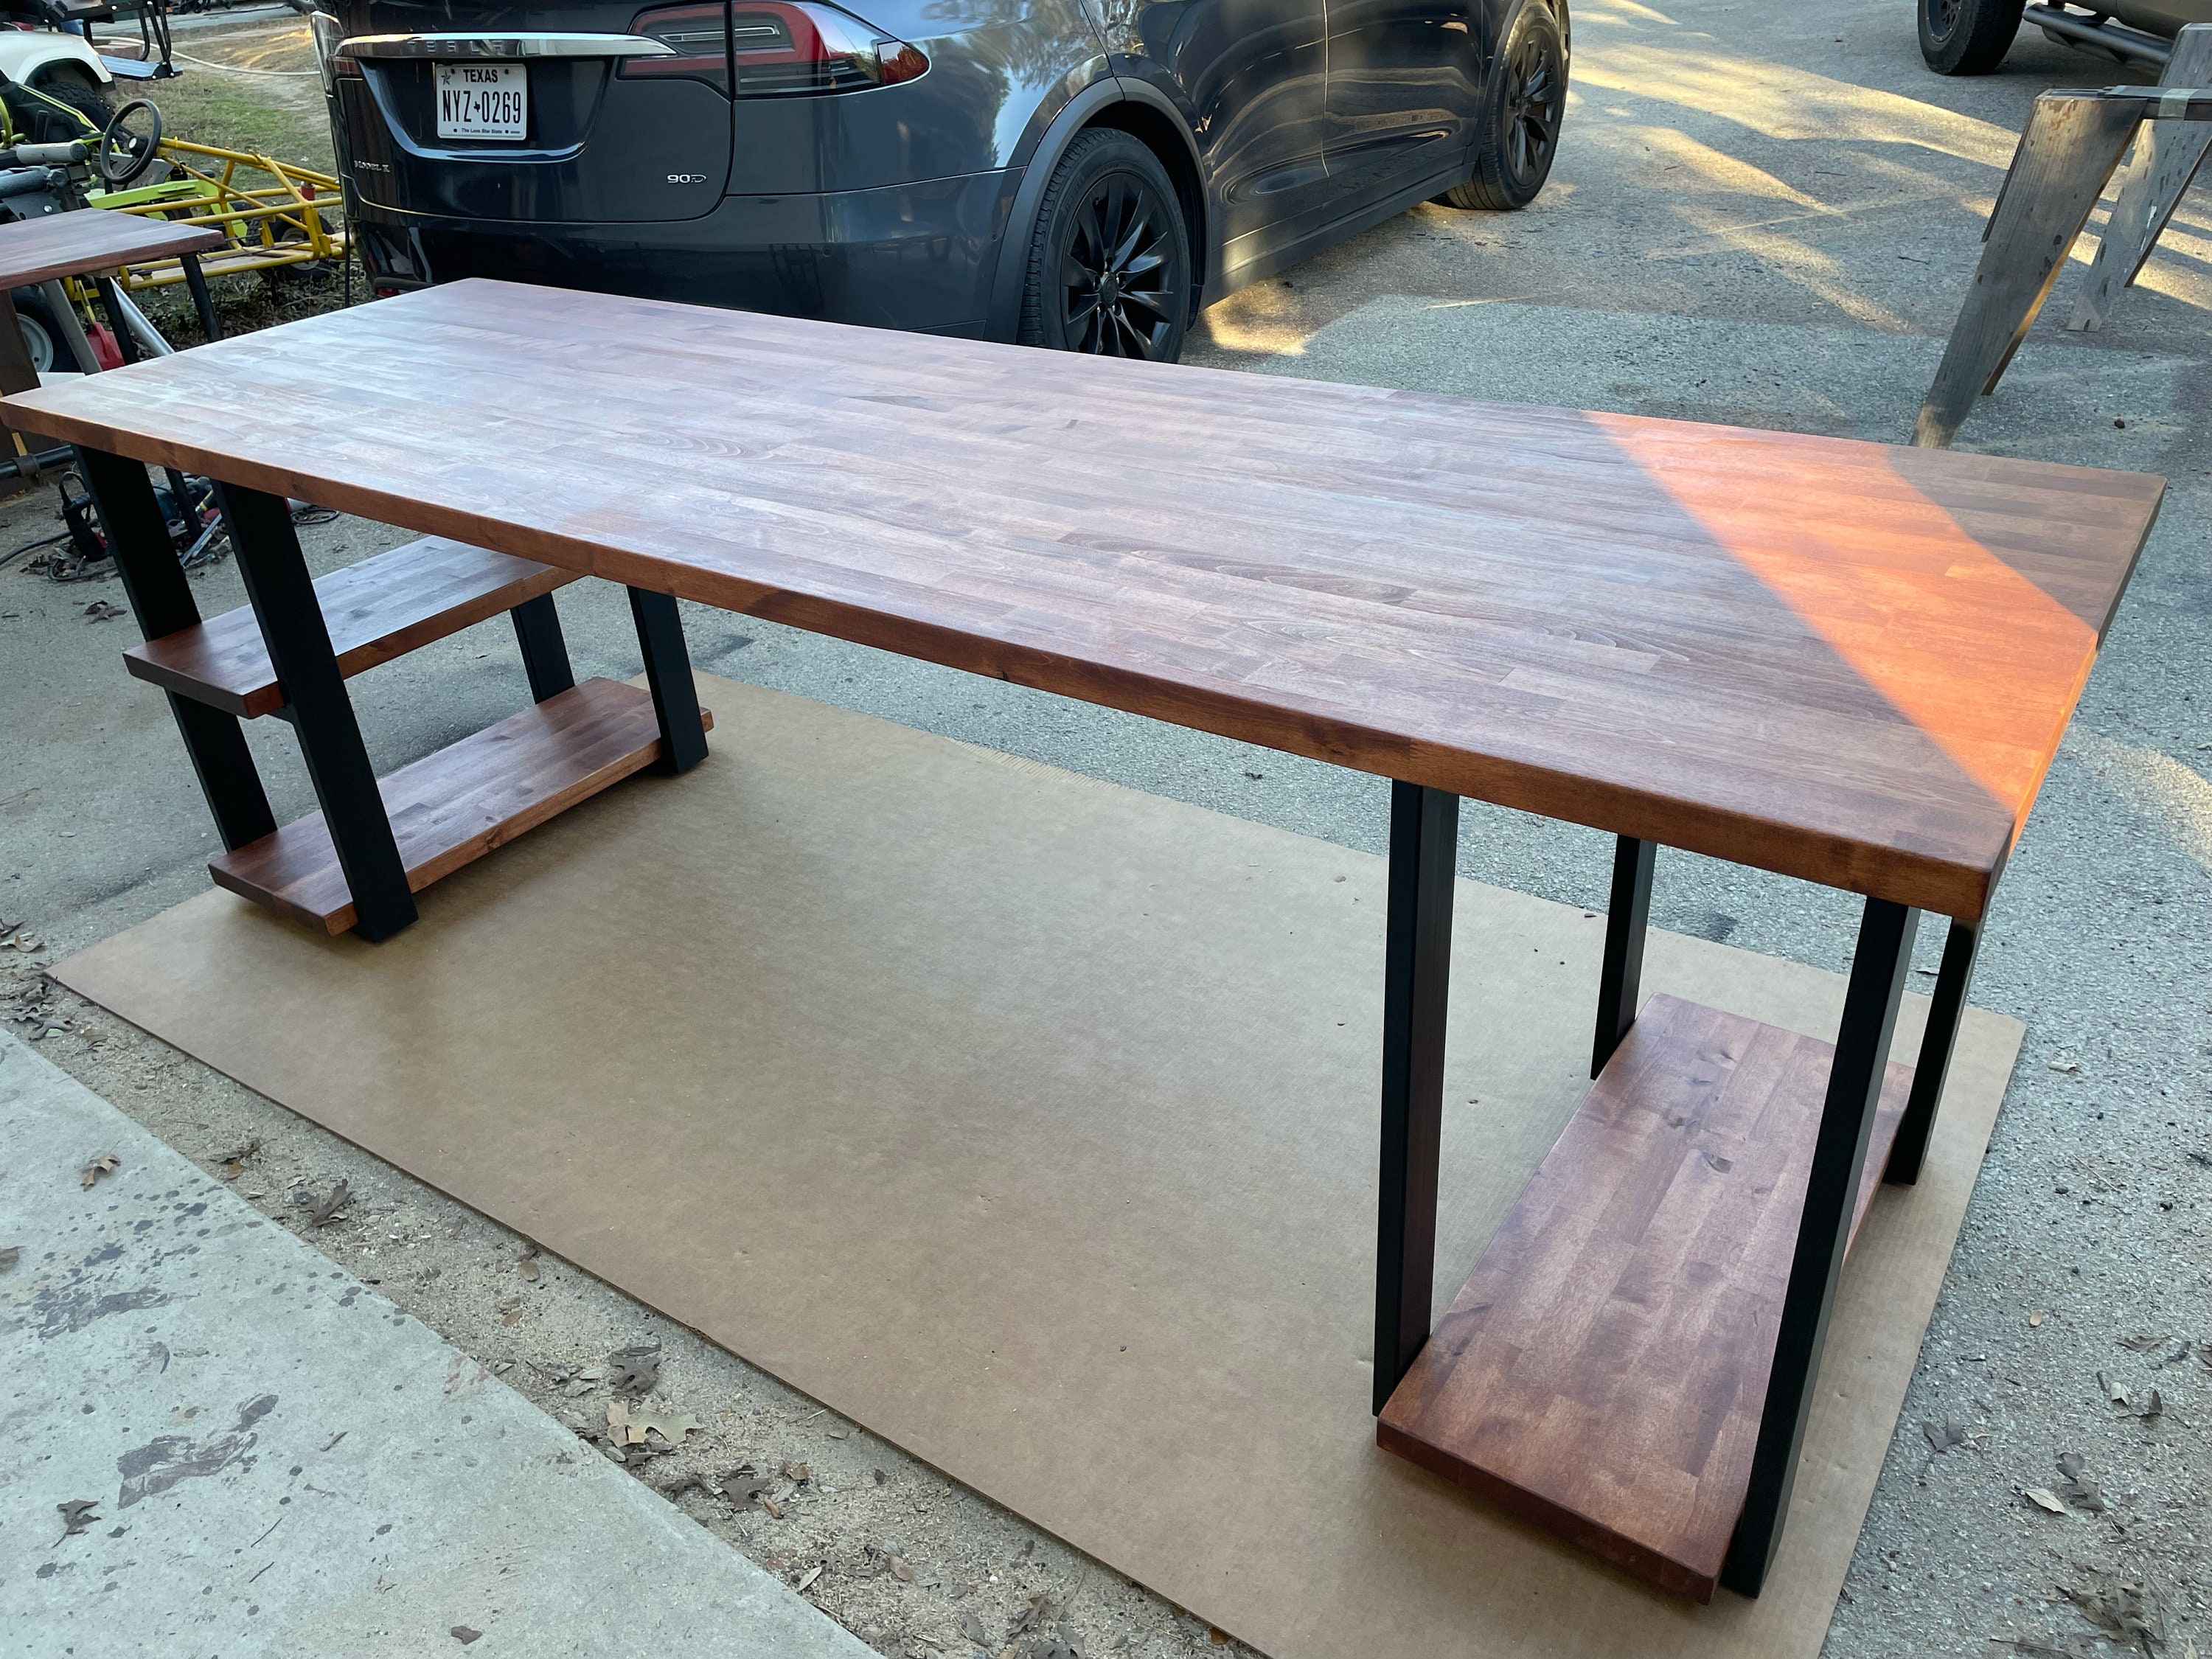 Let's go! Custom L desk made from butcher block. 5'2” x 8', and 25